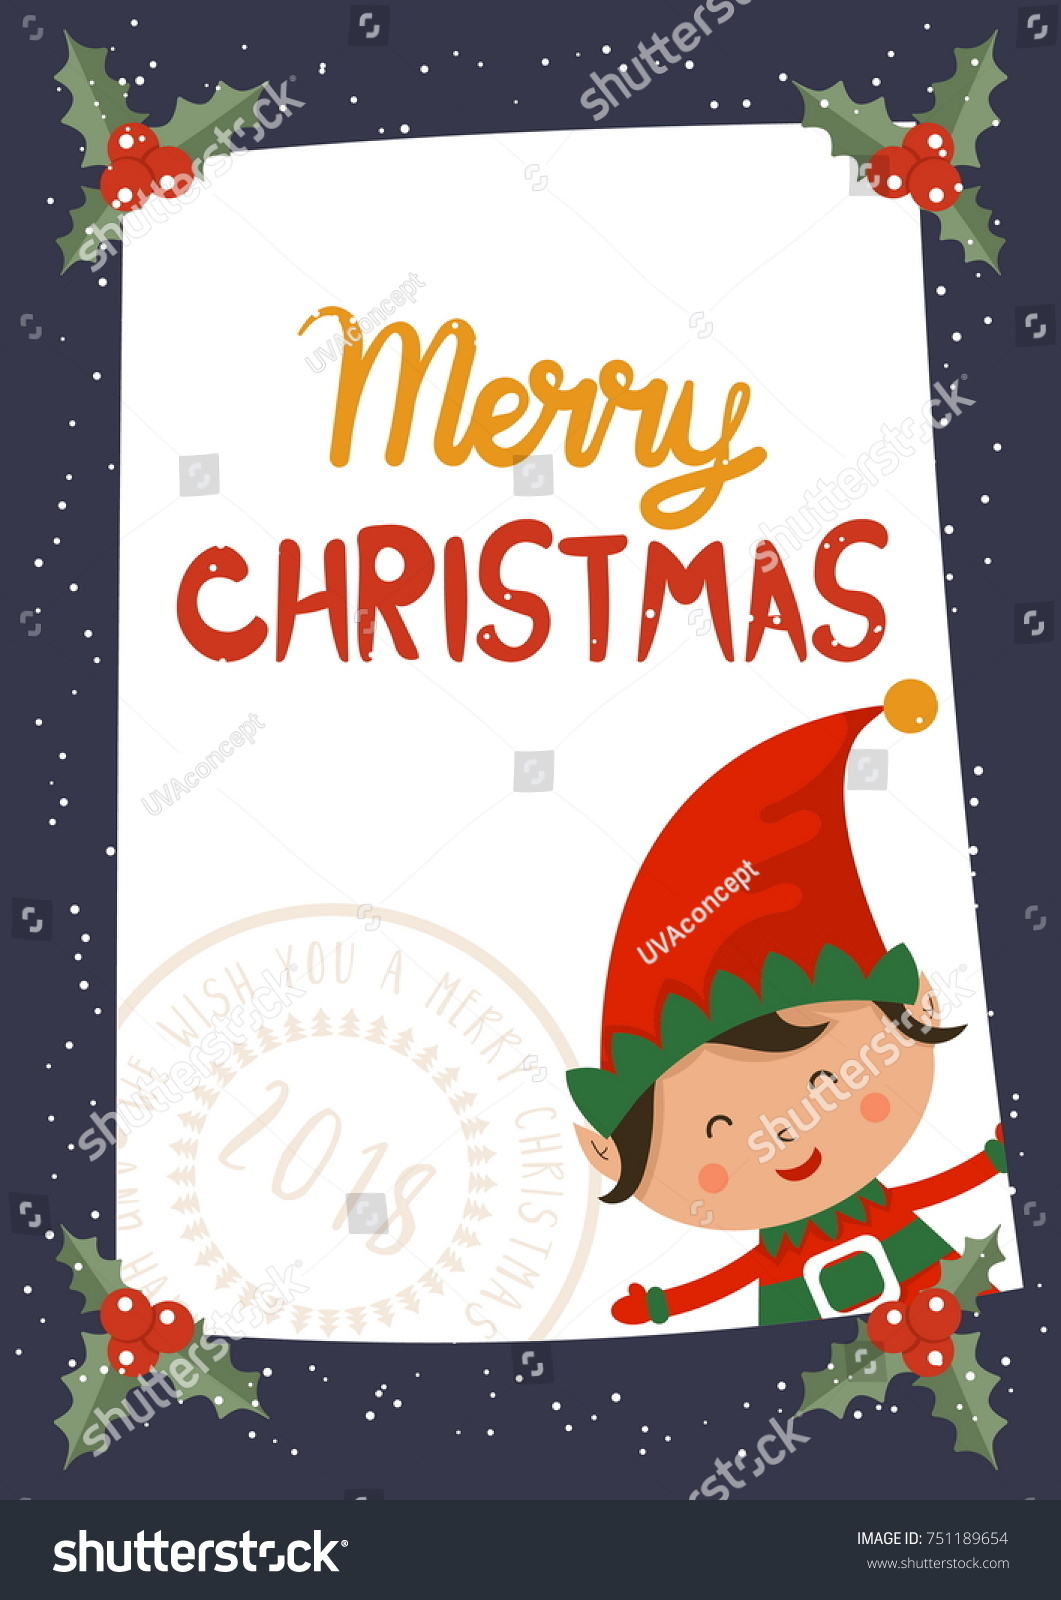 Cartoon illustration for holiday theme with elf on winter background Greeting card for Merry Christmas